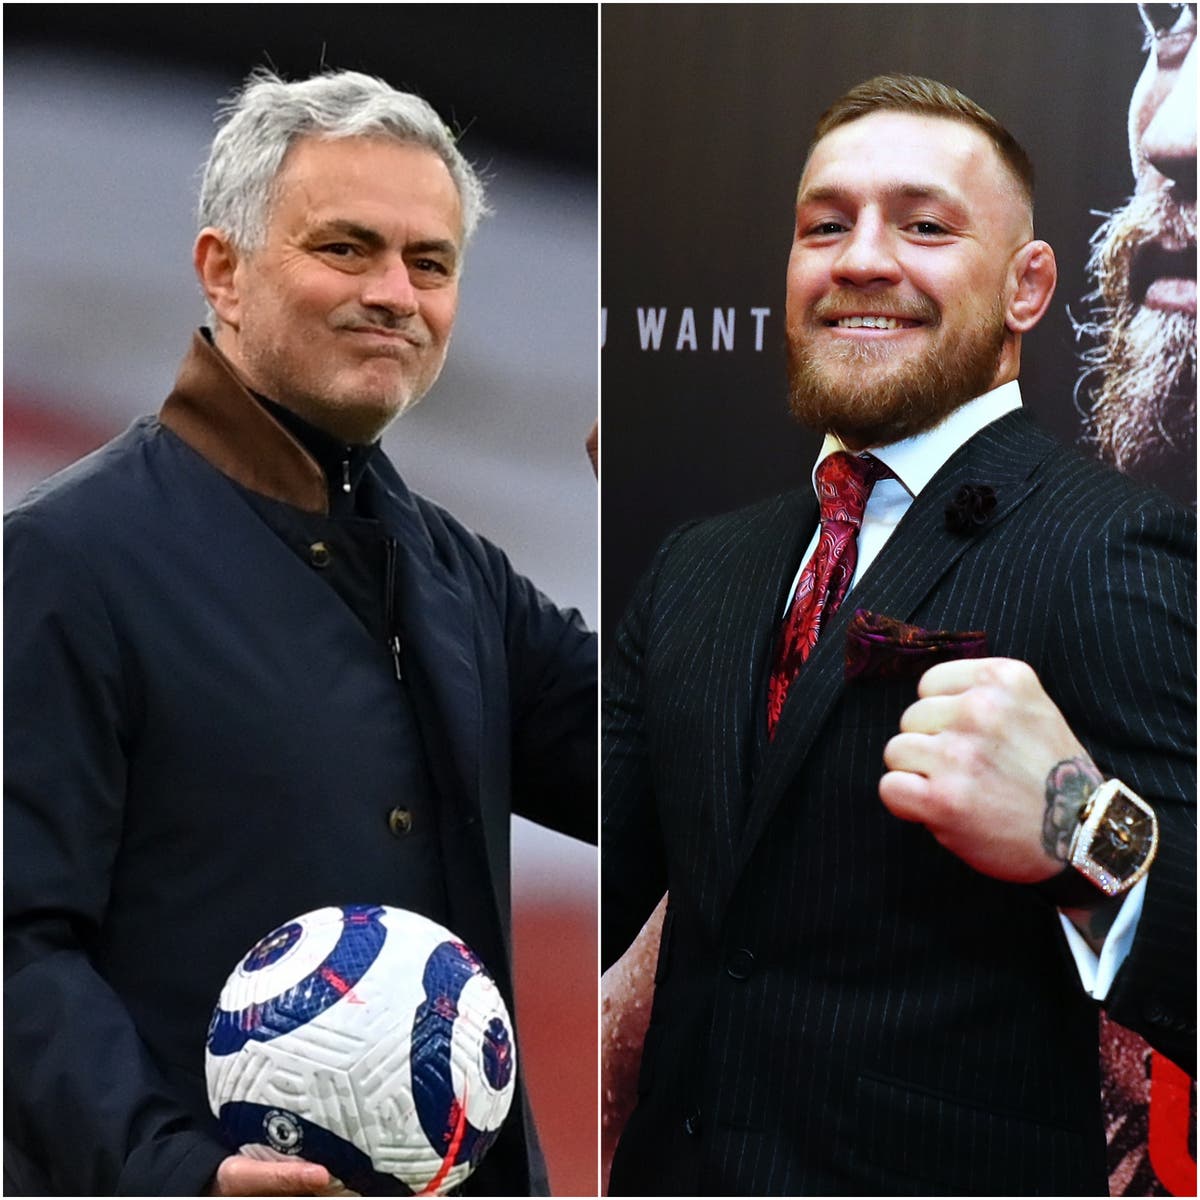 Mourinho meets McGregor, while Phillips was on TV – Saturday’s sporting social